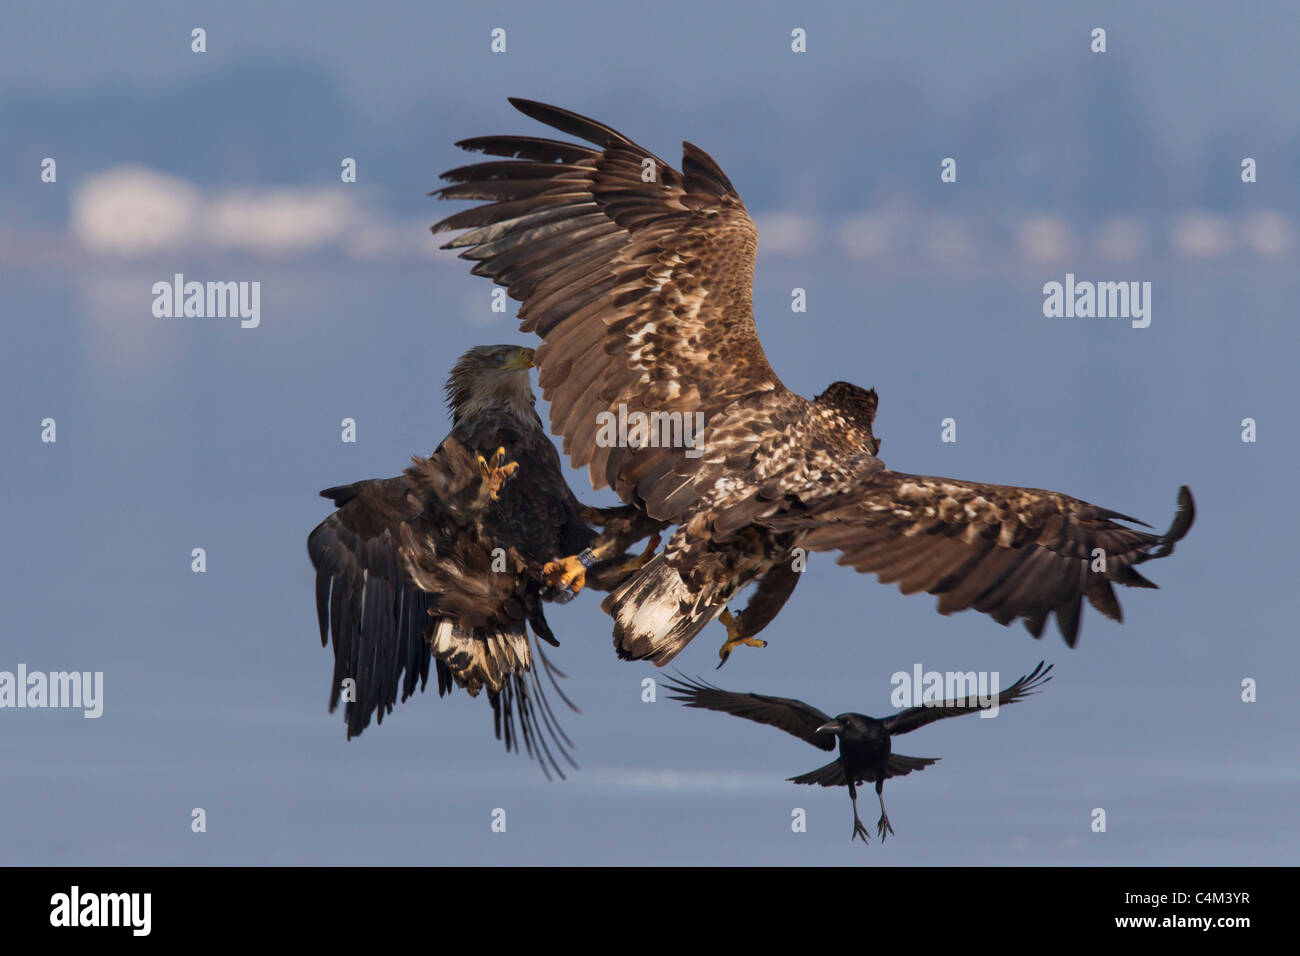 White-tailed Eagle / Sea Eagle / Erne (Haliaeetus albicilla), two eagles fighting in flight in winter, Germany Stock Photo